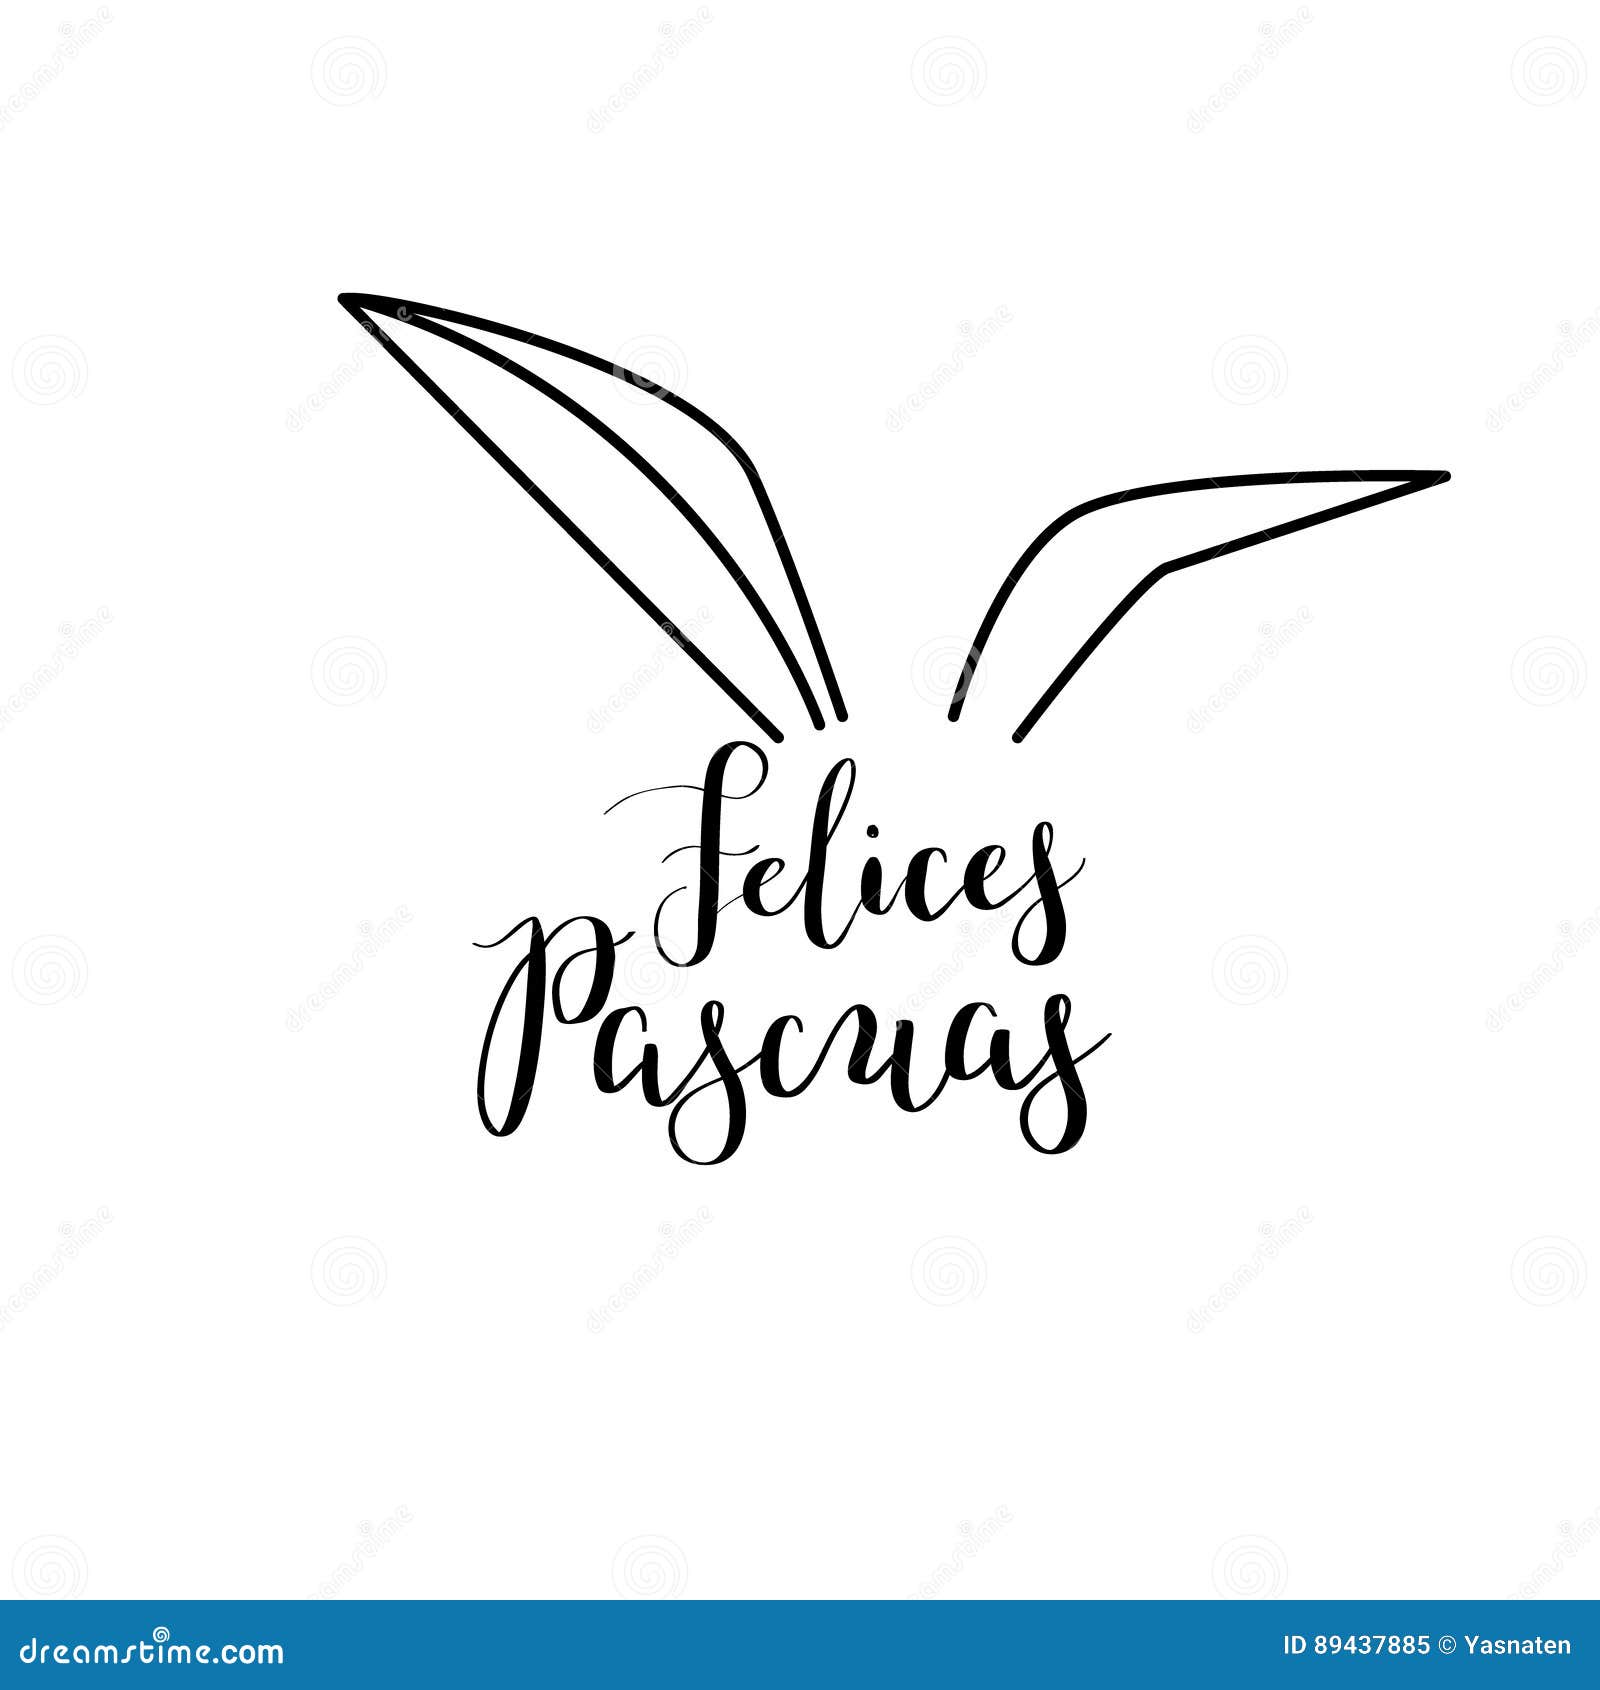 calligraphy hand-drawn felices pascuas lettering in spanish